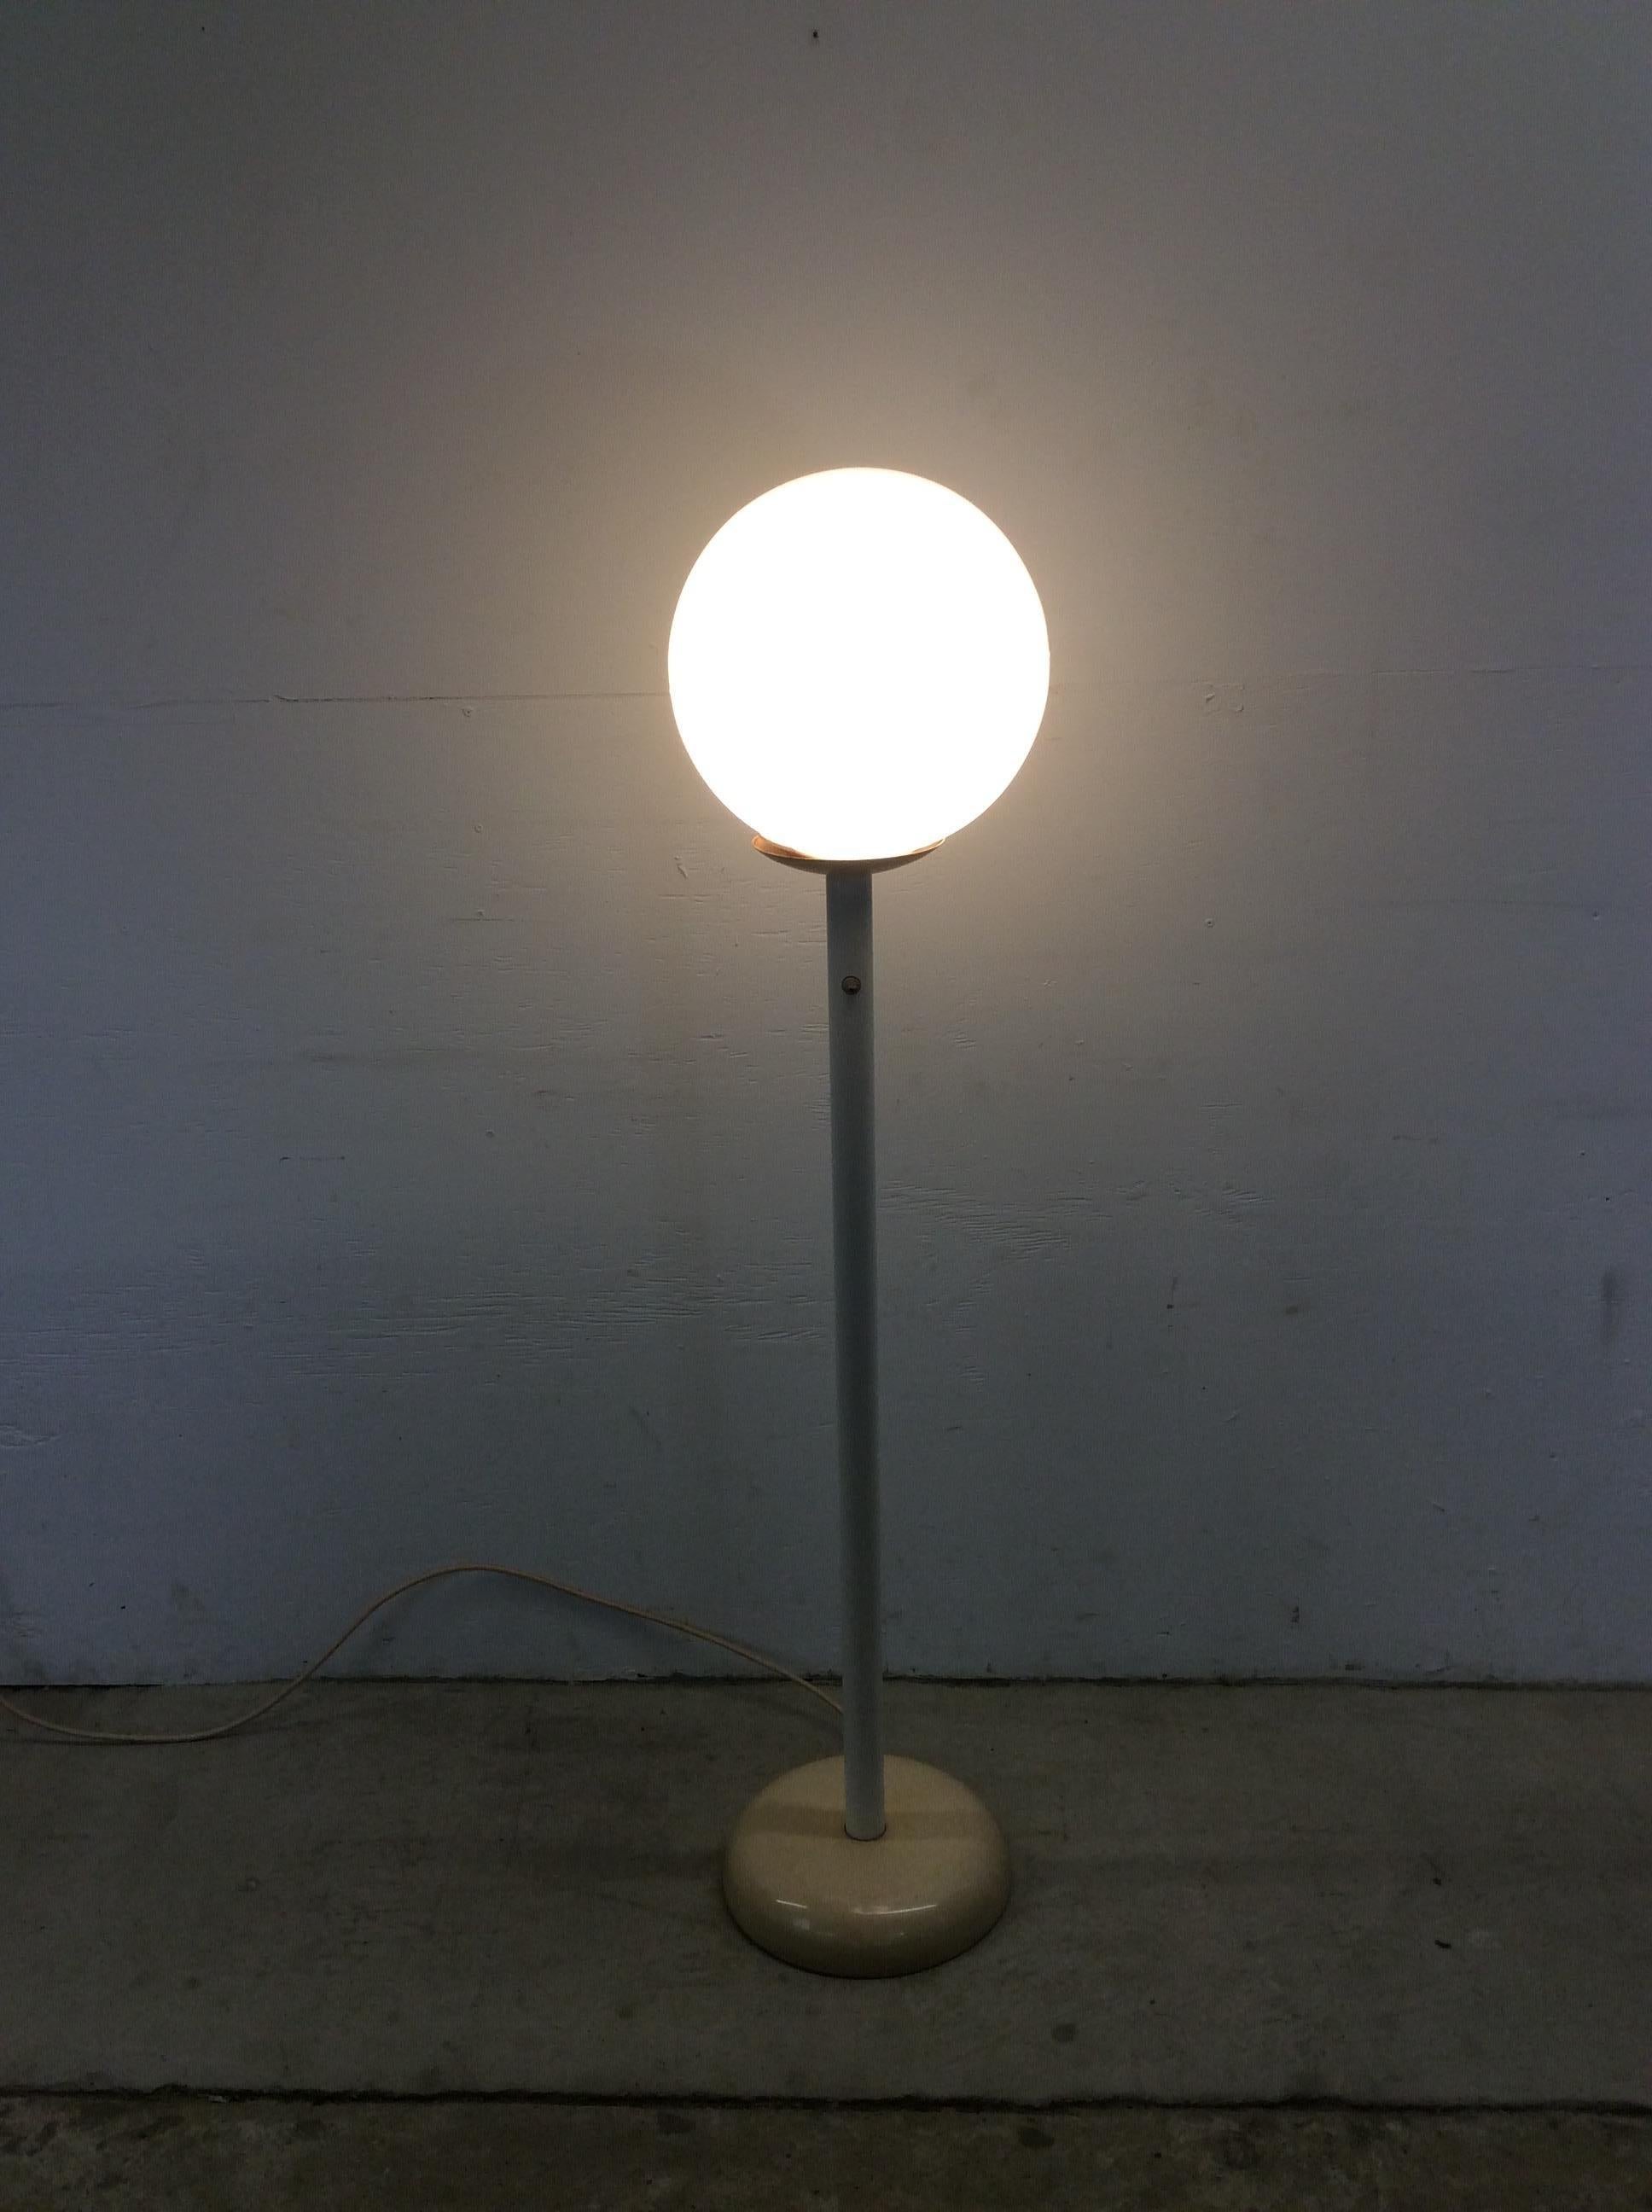 This mid century modern floor lamp features original white painted finish, large white plastic globe, original wiring, and rounded base.

Dimensions: 13w 13d 57h

Original finish is in good condition with only minor scuffs, slight scratches, small